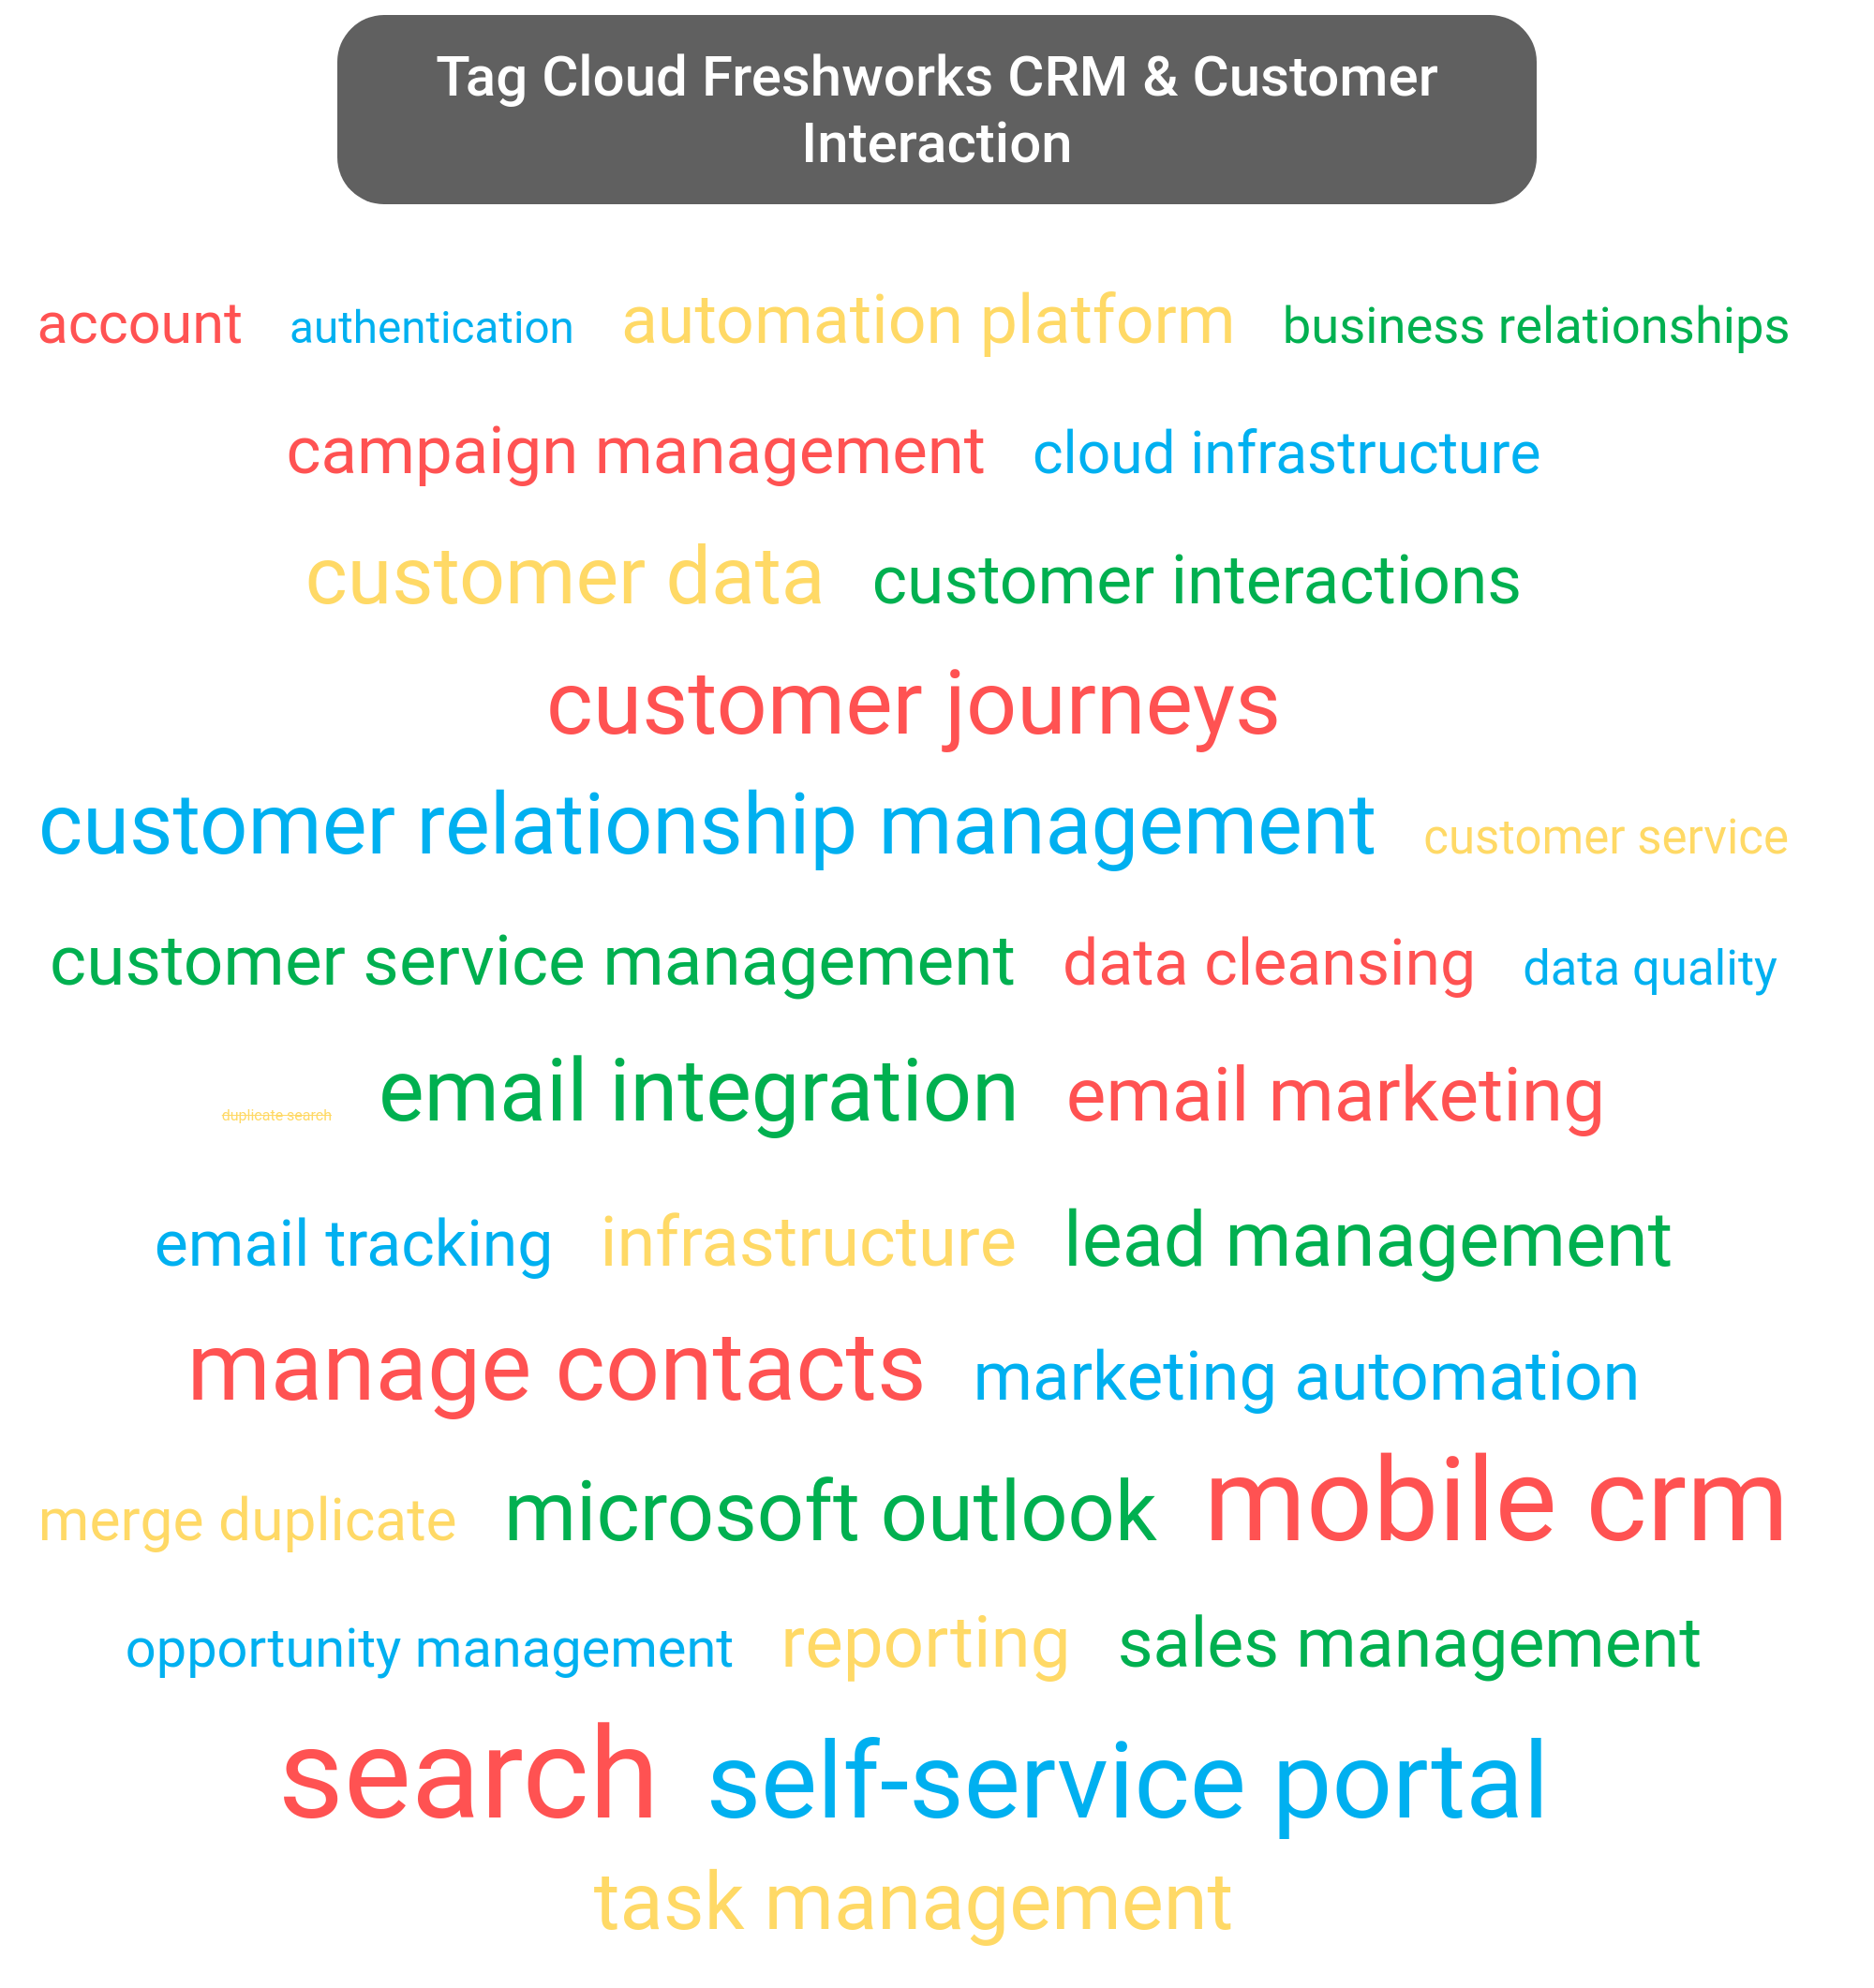 Tag cloud of the Freshworks CRM tools.